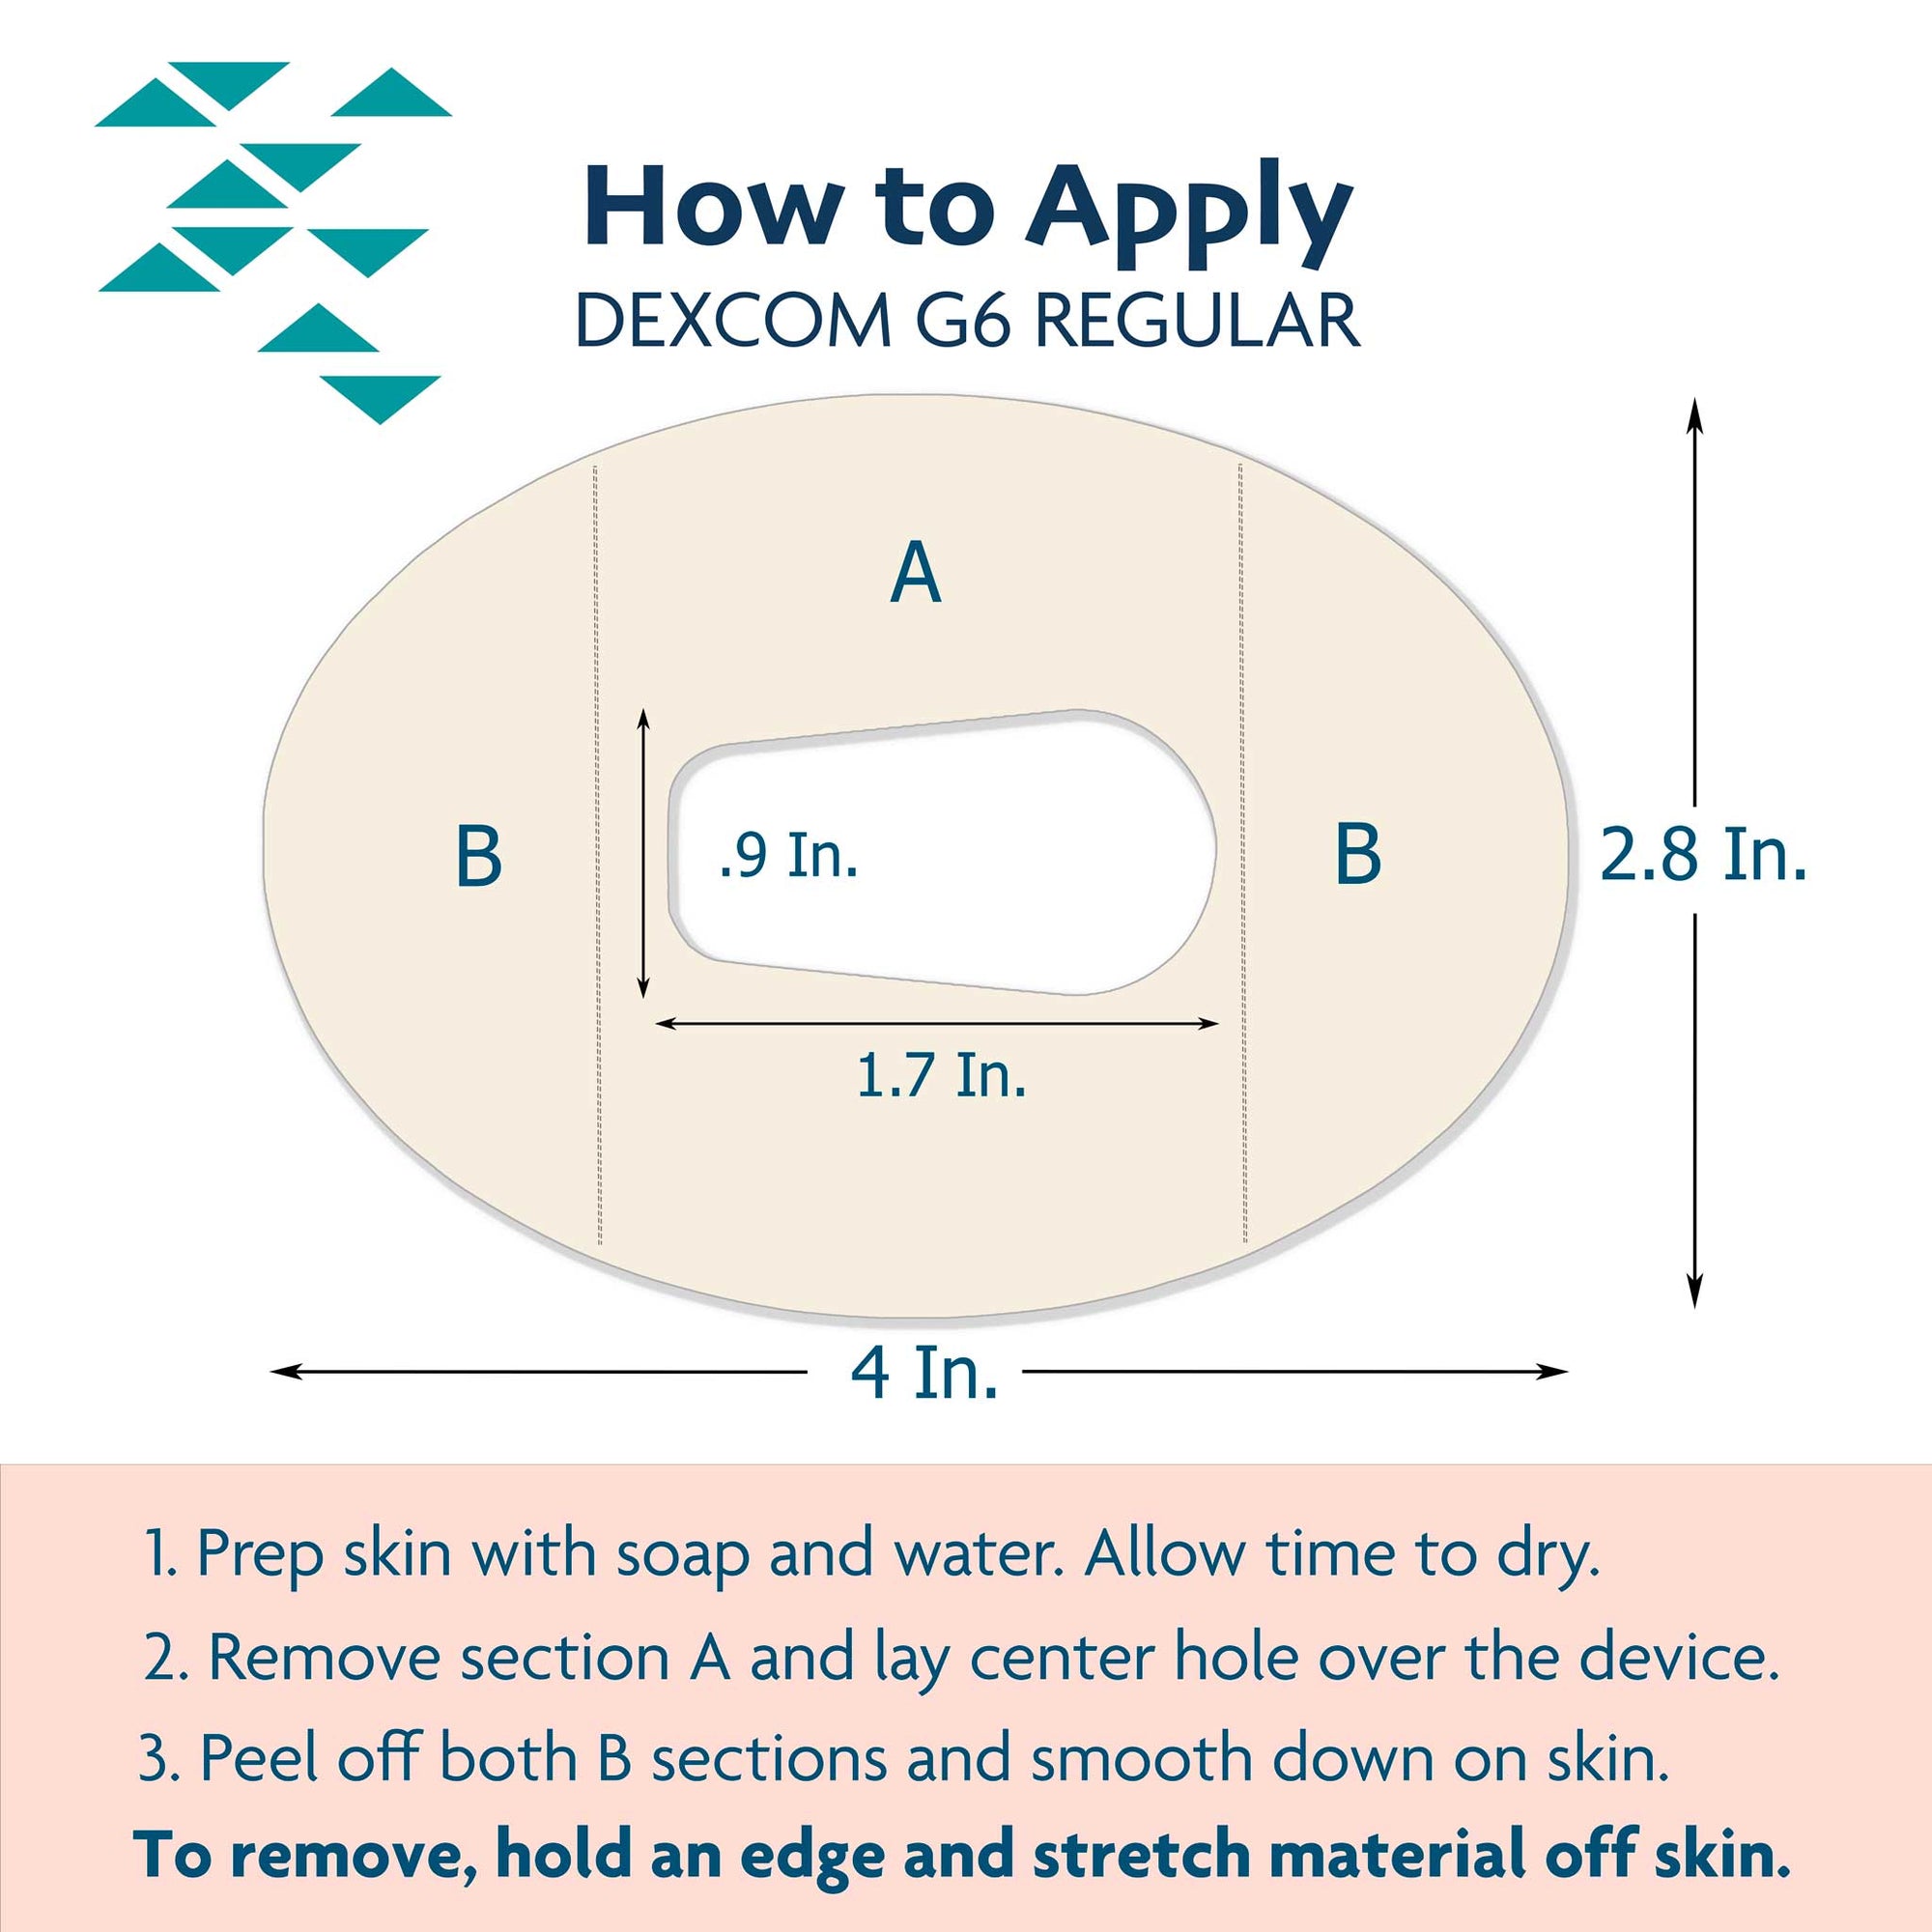 ExpressionMed Tips and tricks for proper application of Dexcom G6 CGM patch